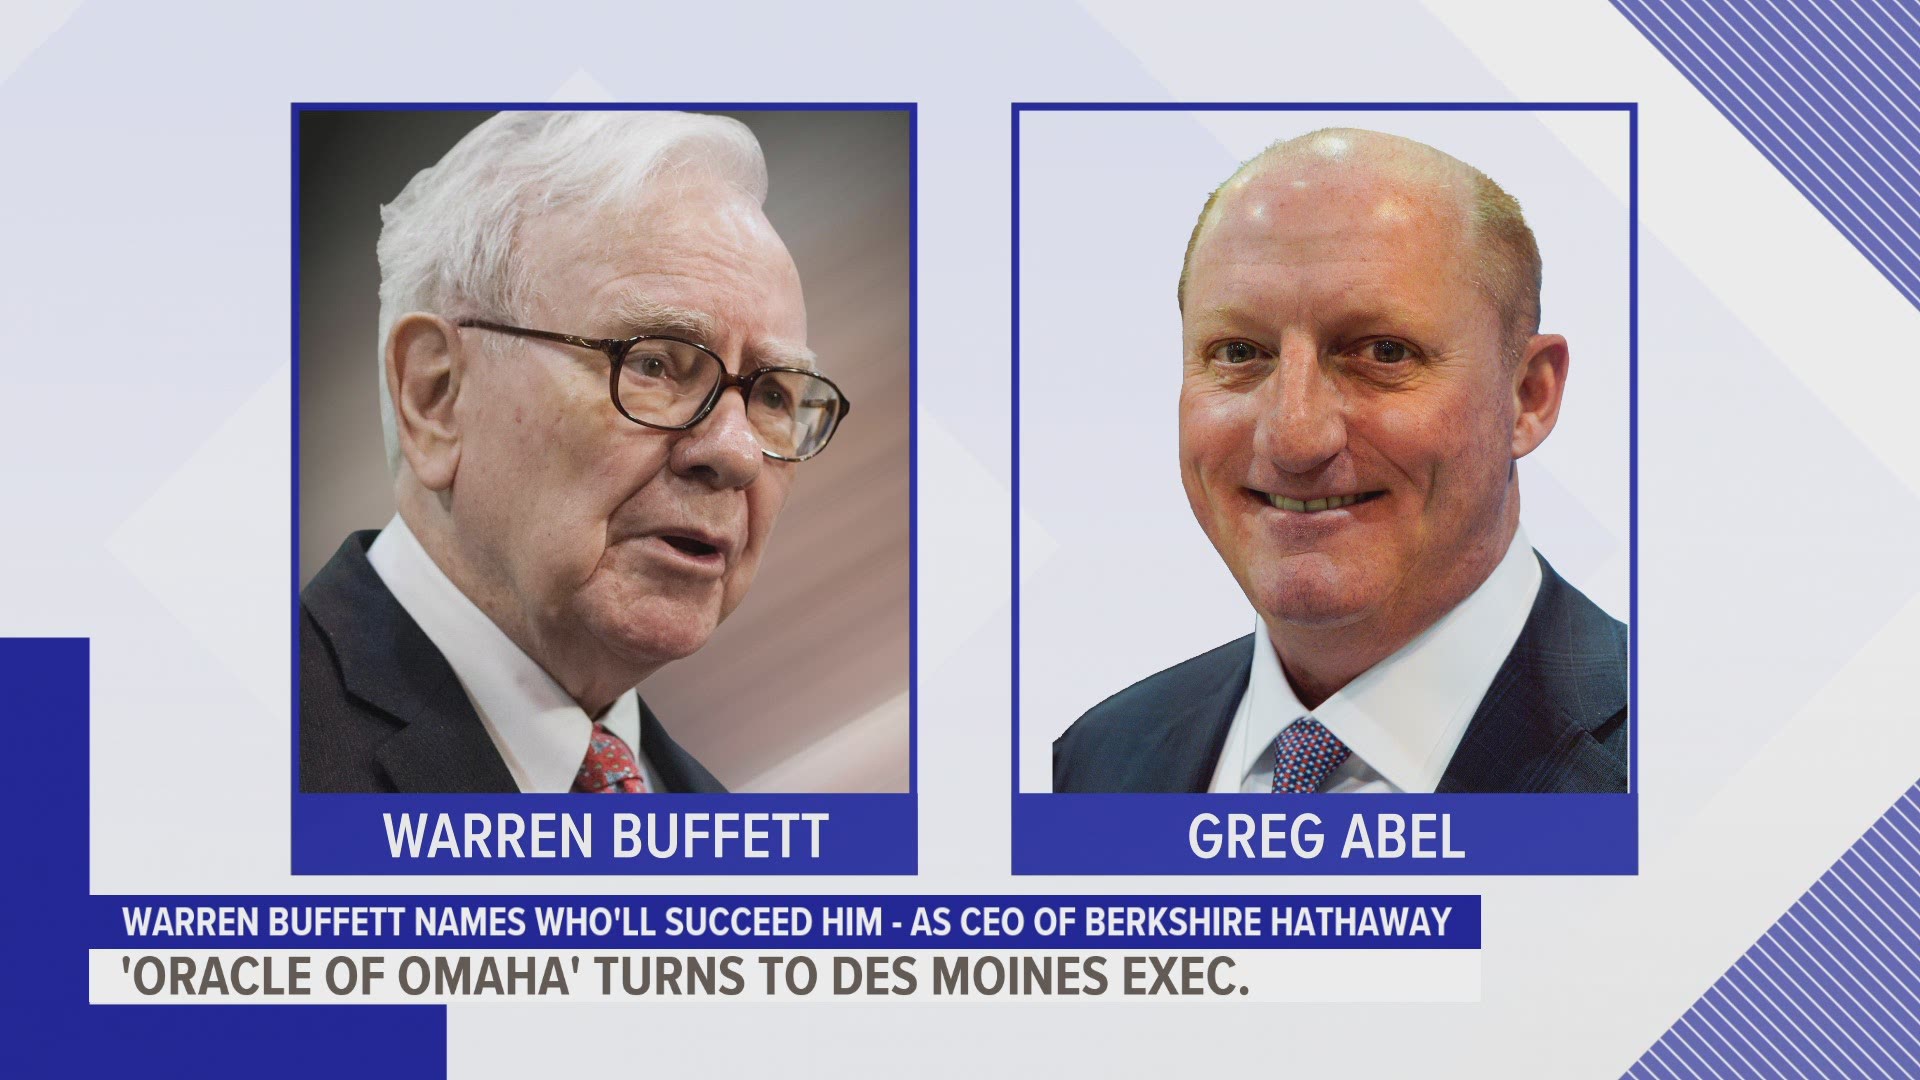 Buffett, 90, who says he has no plans to retire, has previously declined to name the next Berkshire Hathaway CEO.